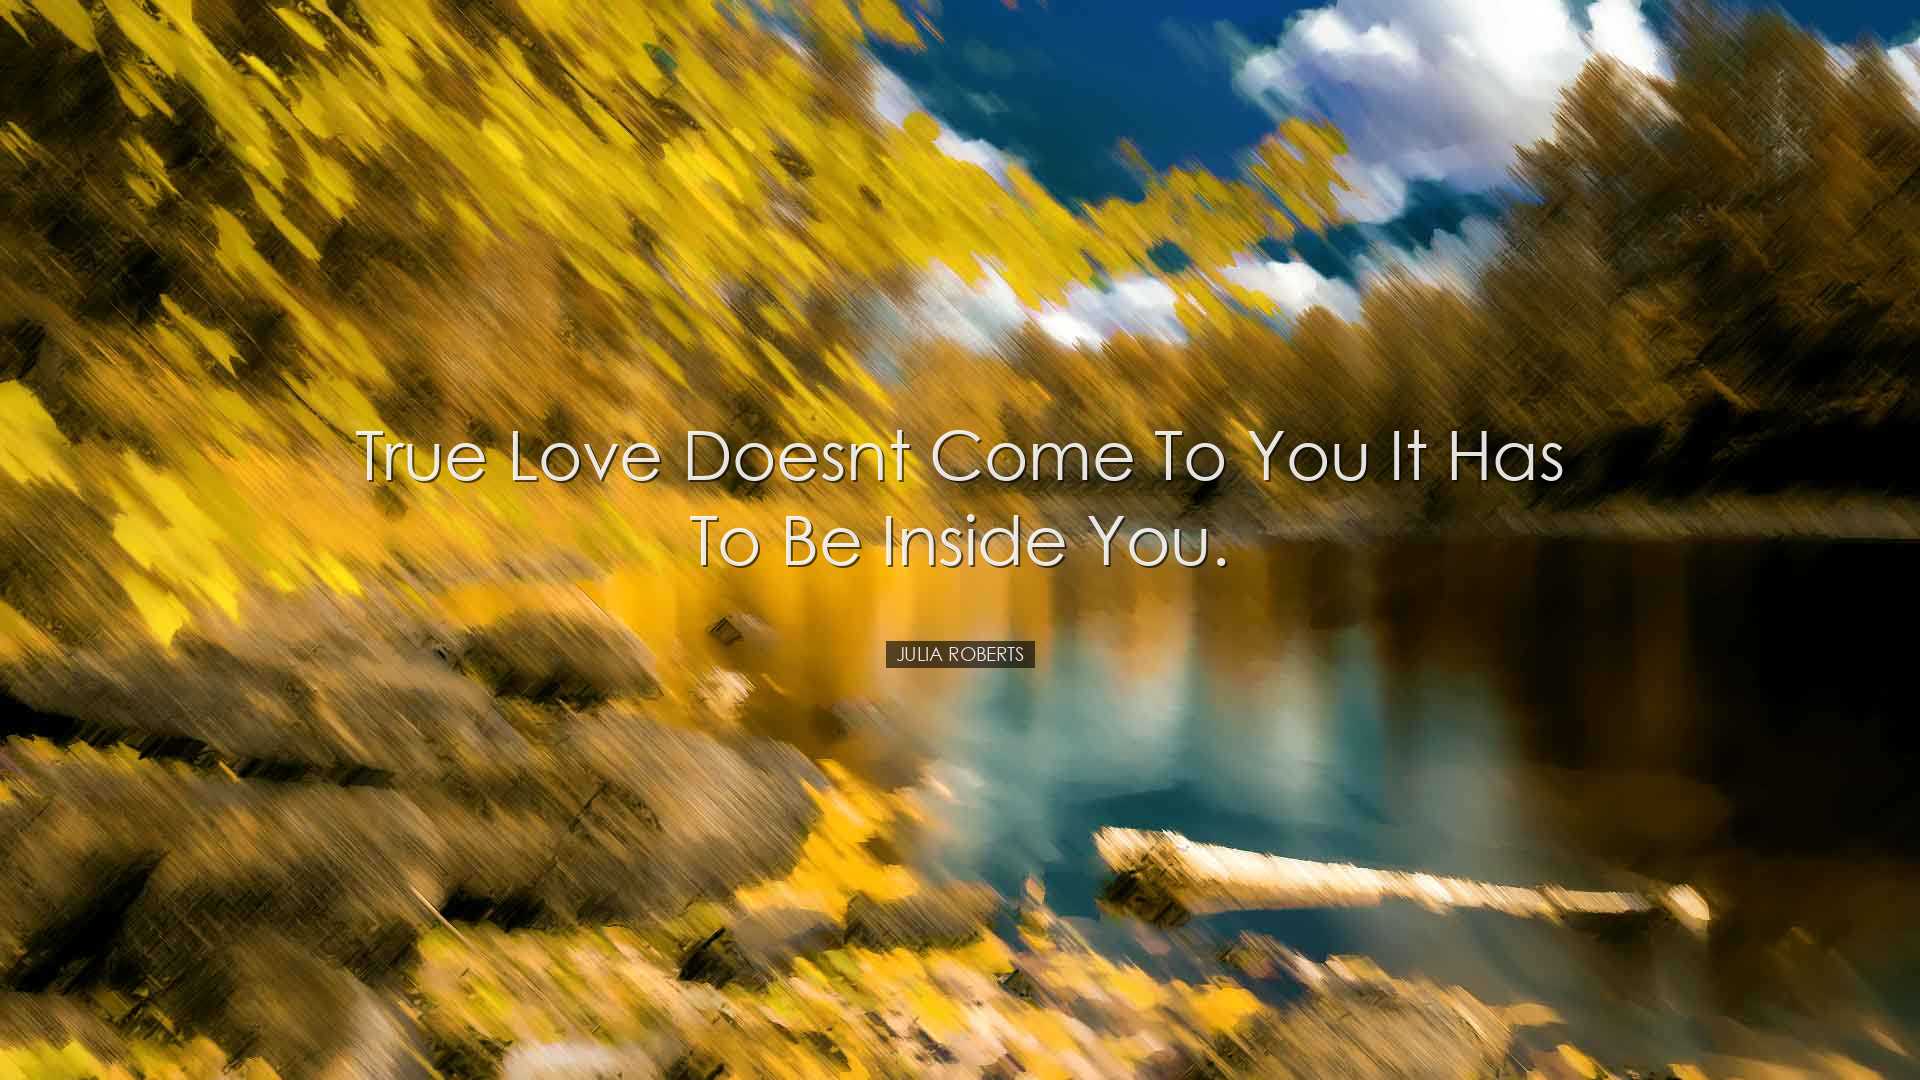 True love doesnt come to you it has to be inside you. - Julia Robe